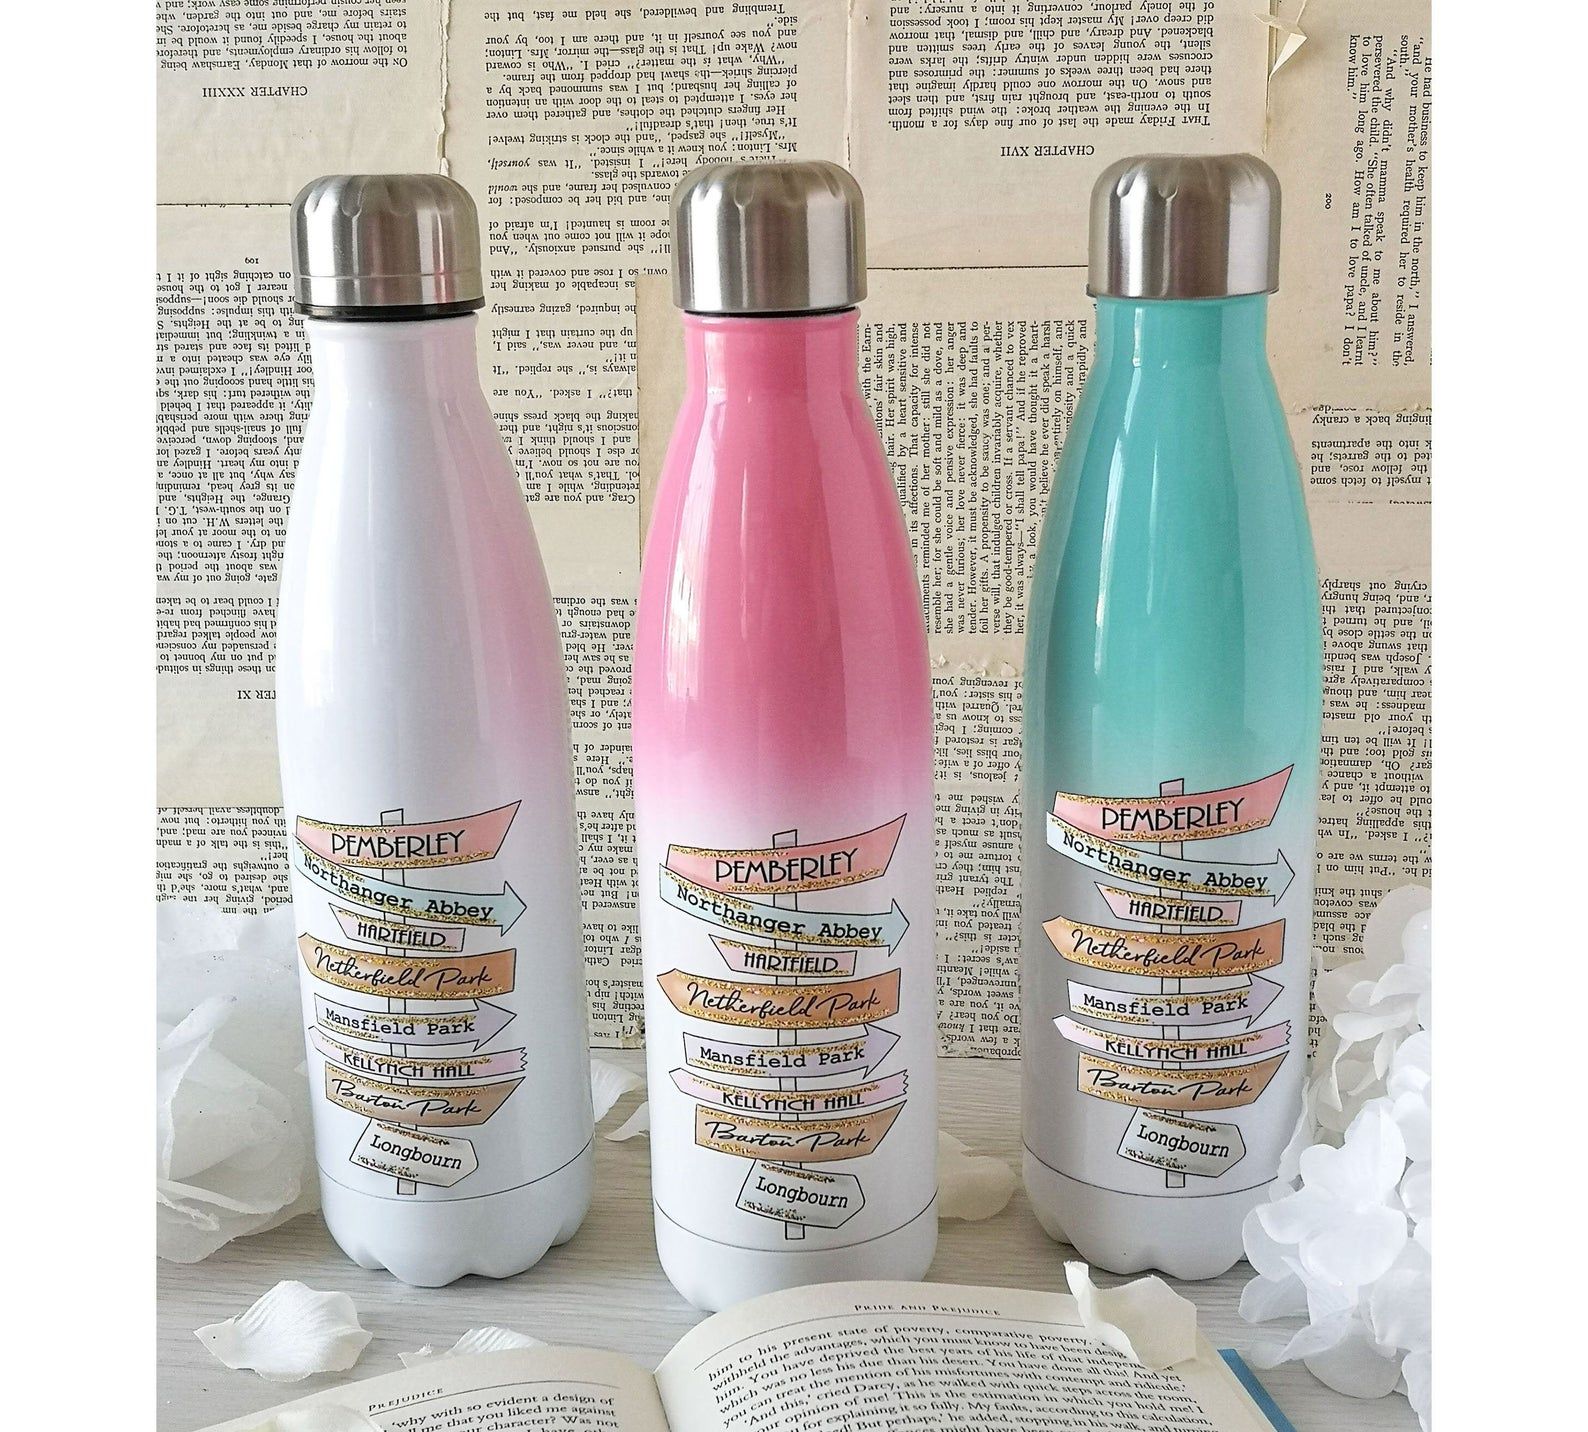 White, pink, and green gradient water bottles with road signs containing places from Jane Austen novels on them